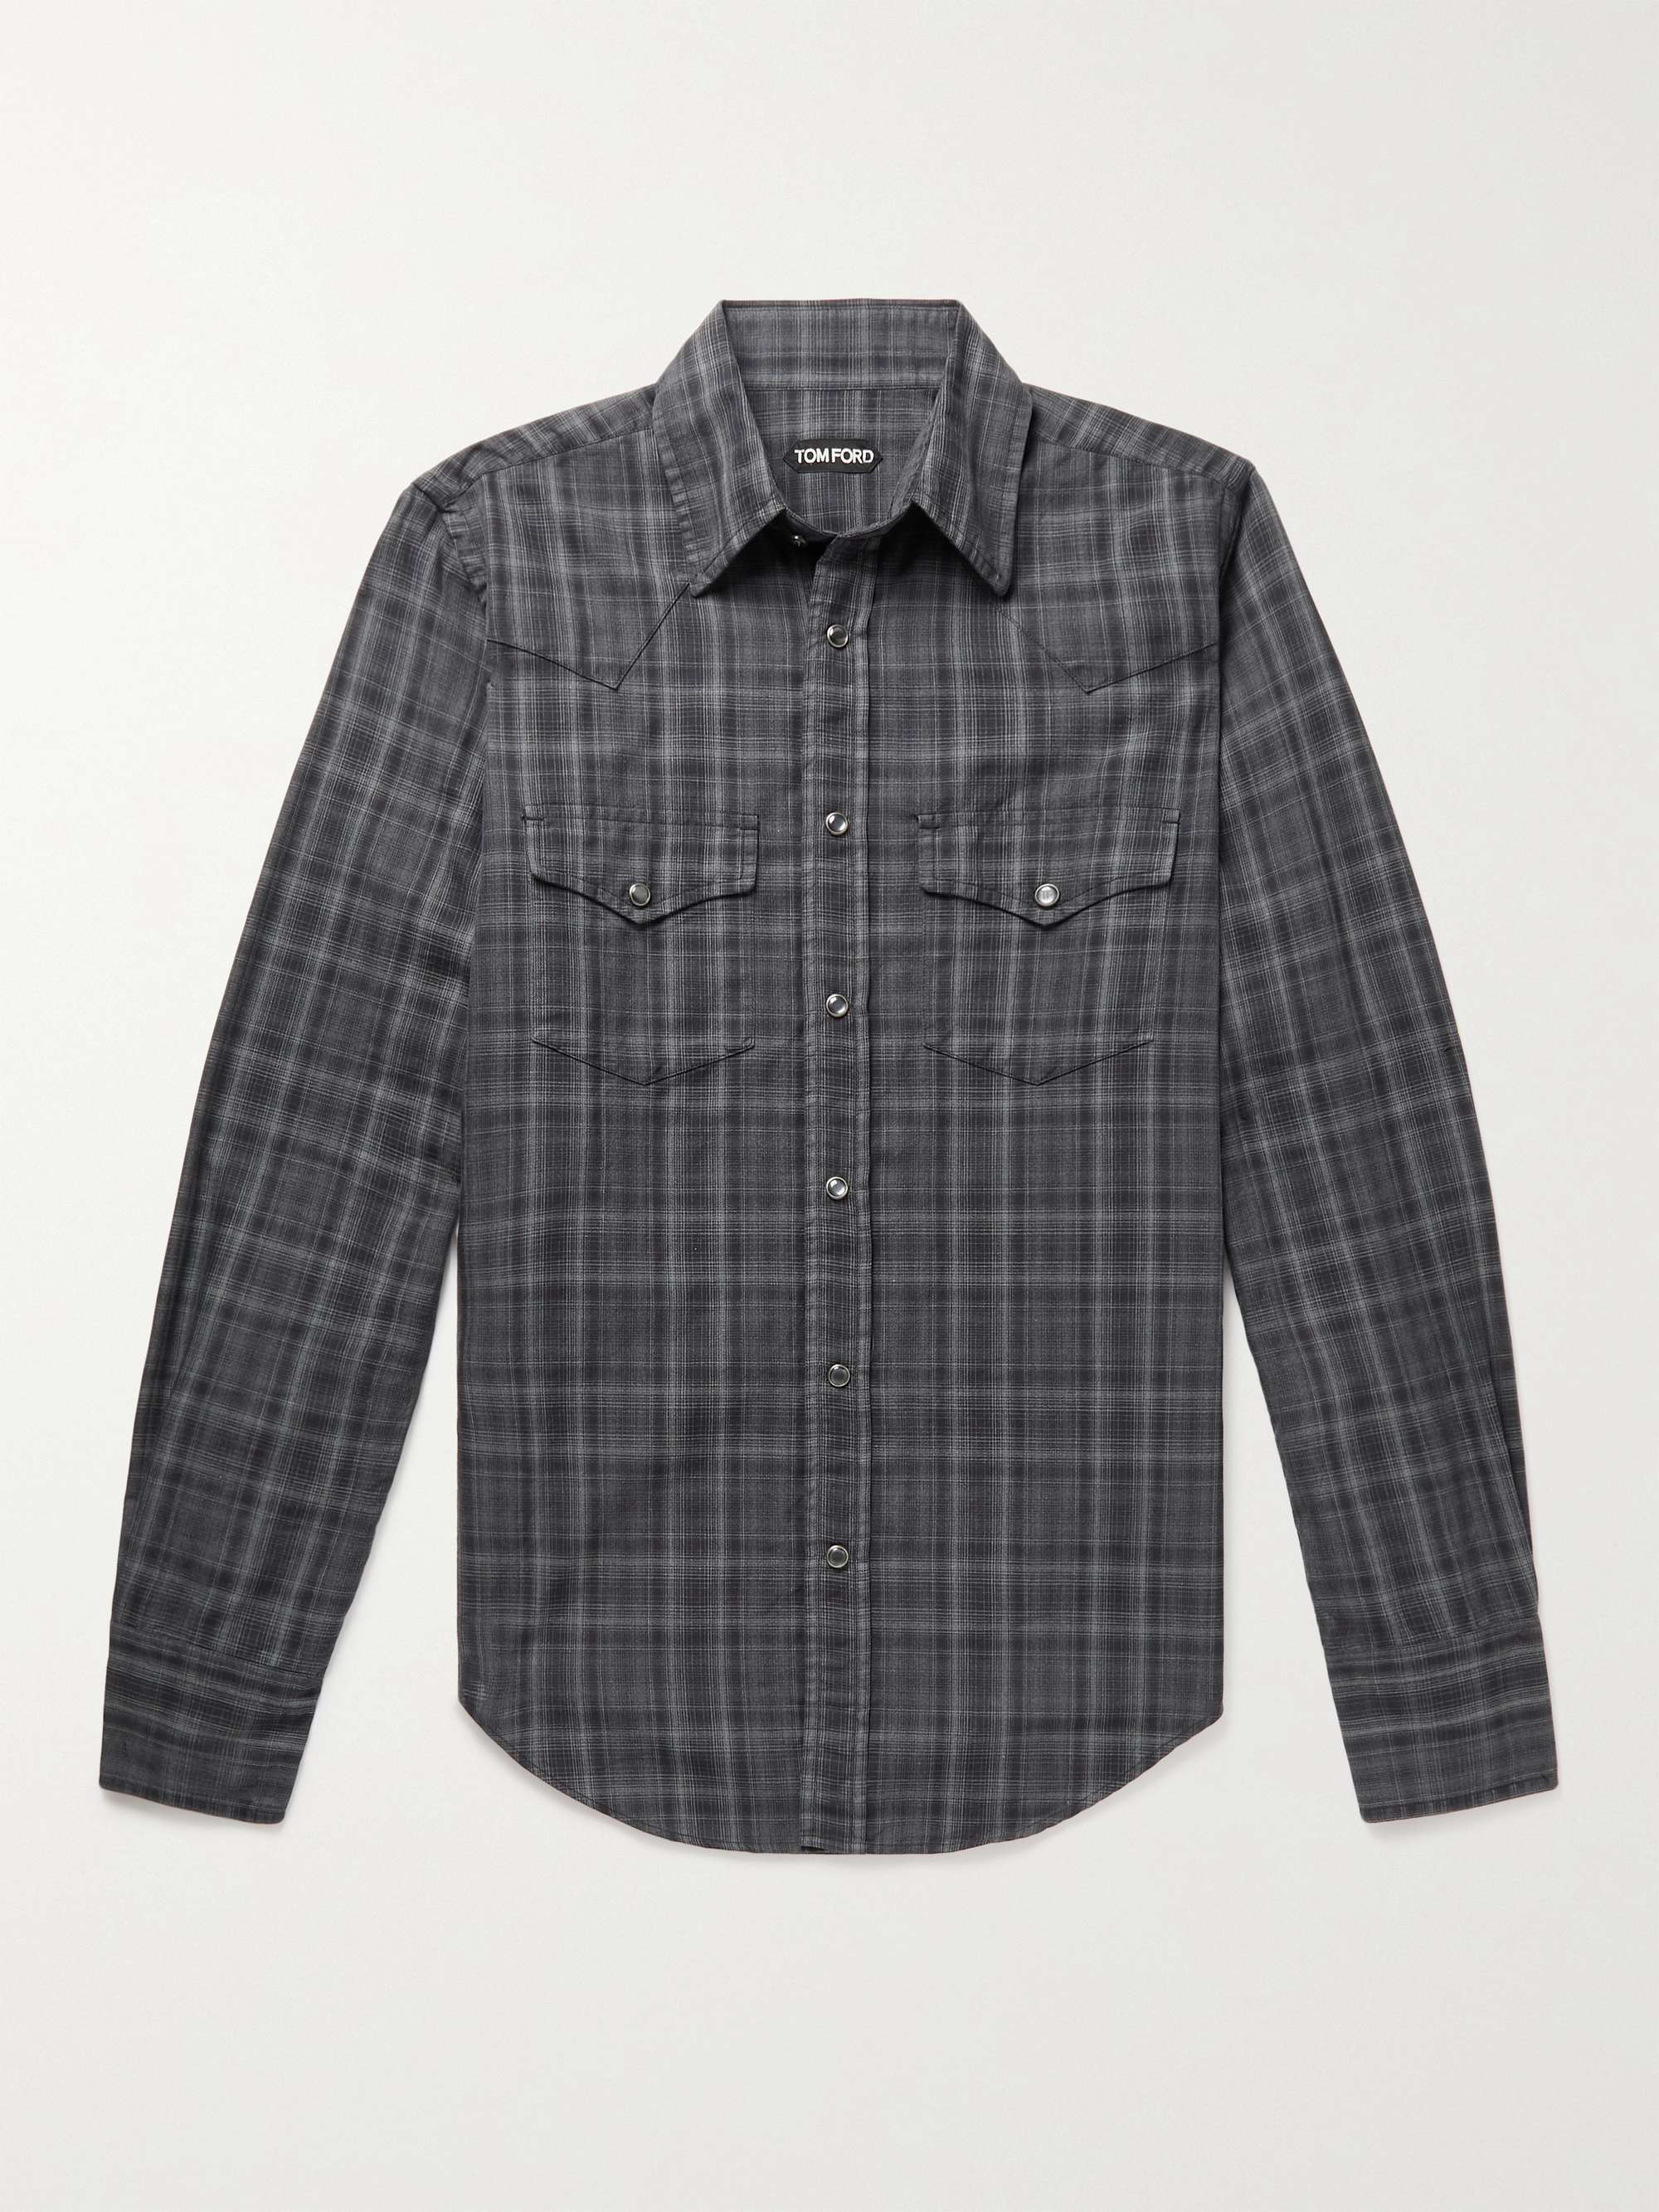 TOM FORD Checked Cotton-Flannel Western Shirt